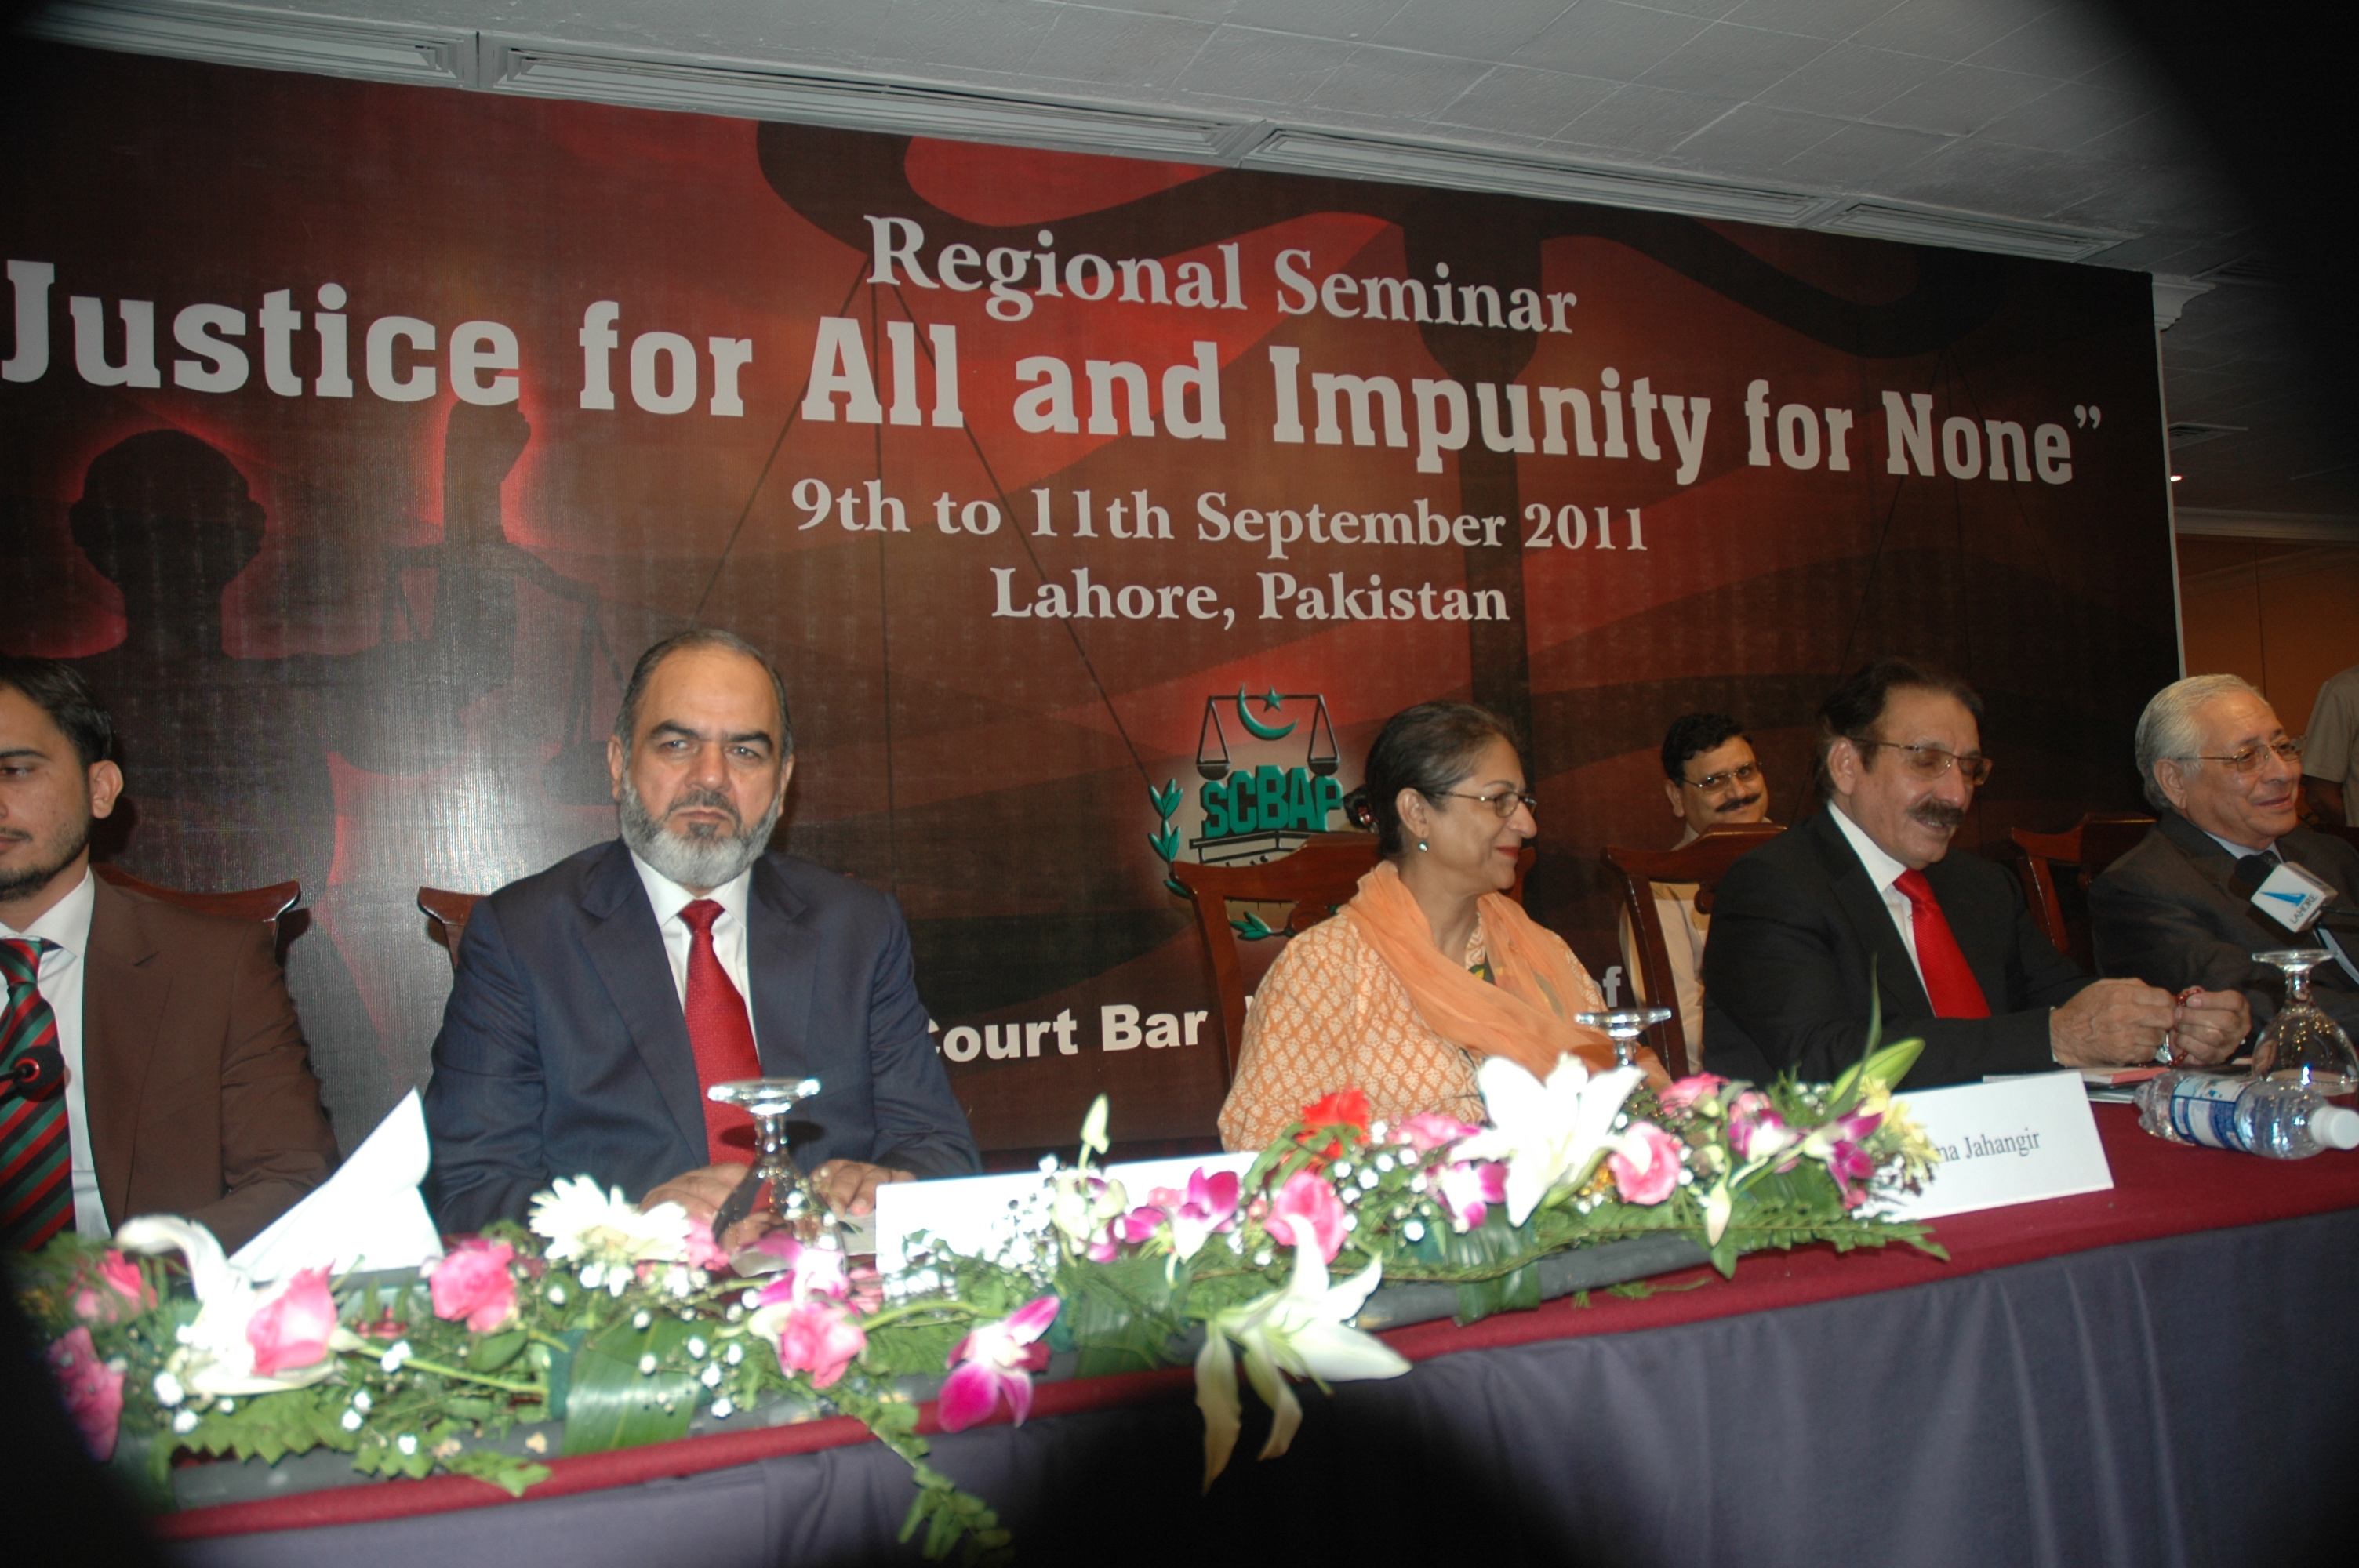 Asma Jahangir, centre, at the regional seminar "Justice for all and impunity for none" in 2011 (photo: Right Livelihood Award Foundation)